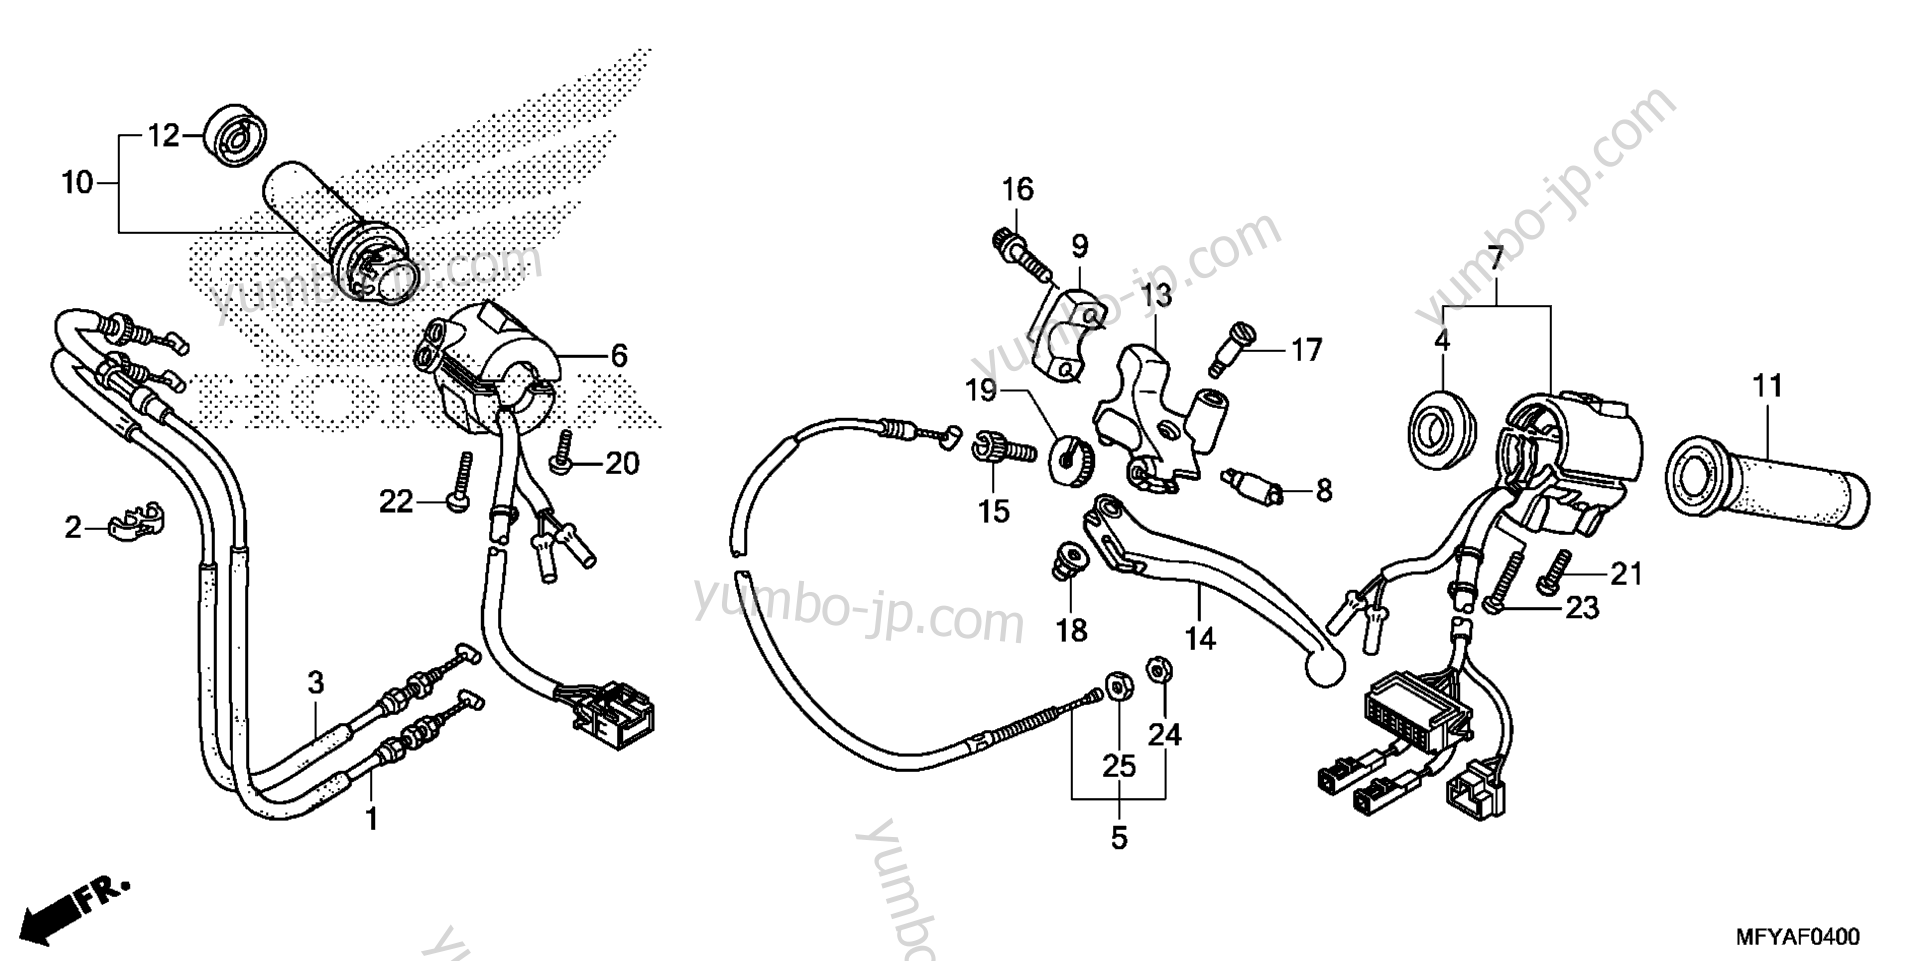 HANDLE LEVER / SWITCH / CABLE for motorcycles HONDA VT1300CT A 2012 year